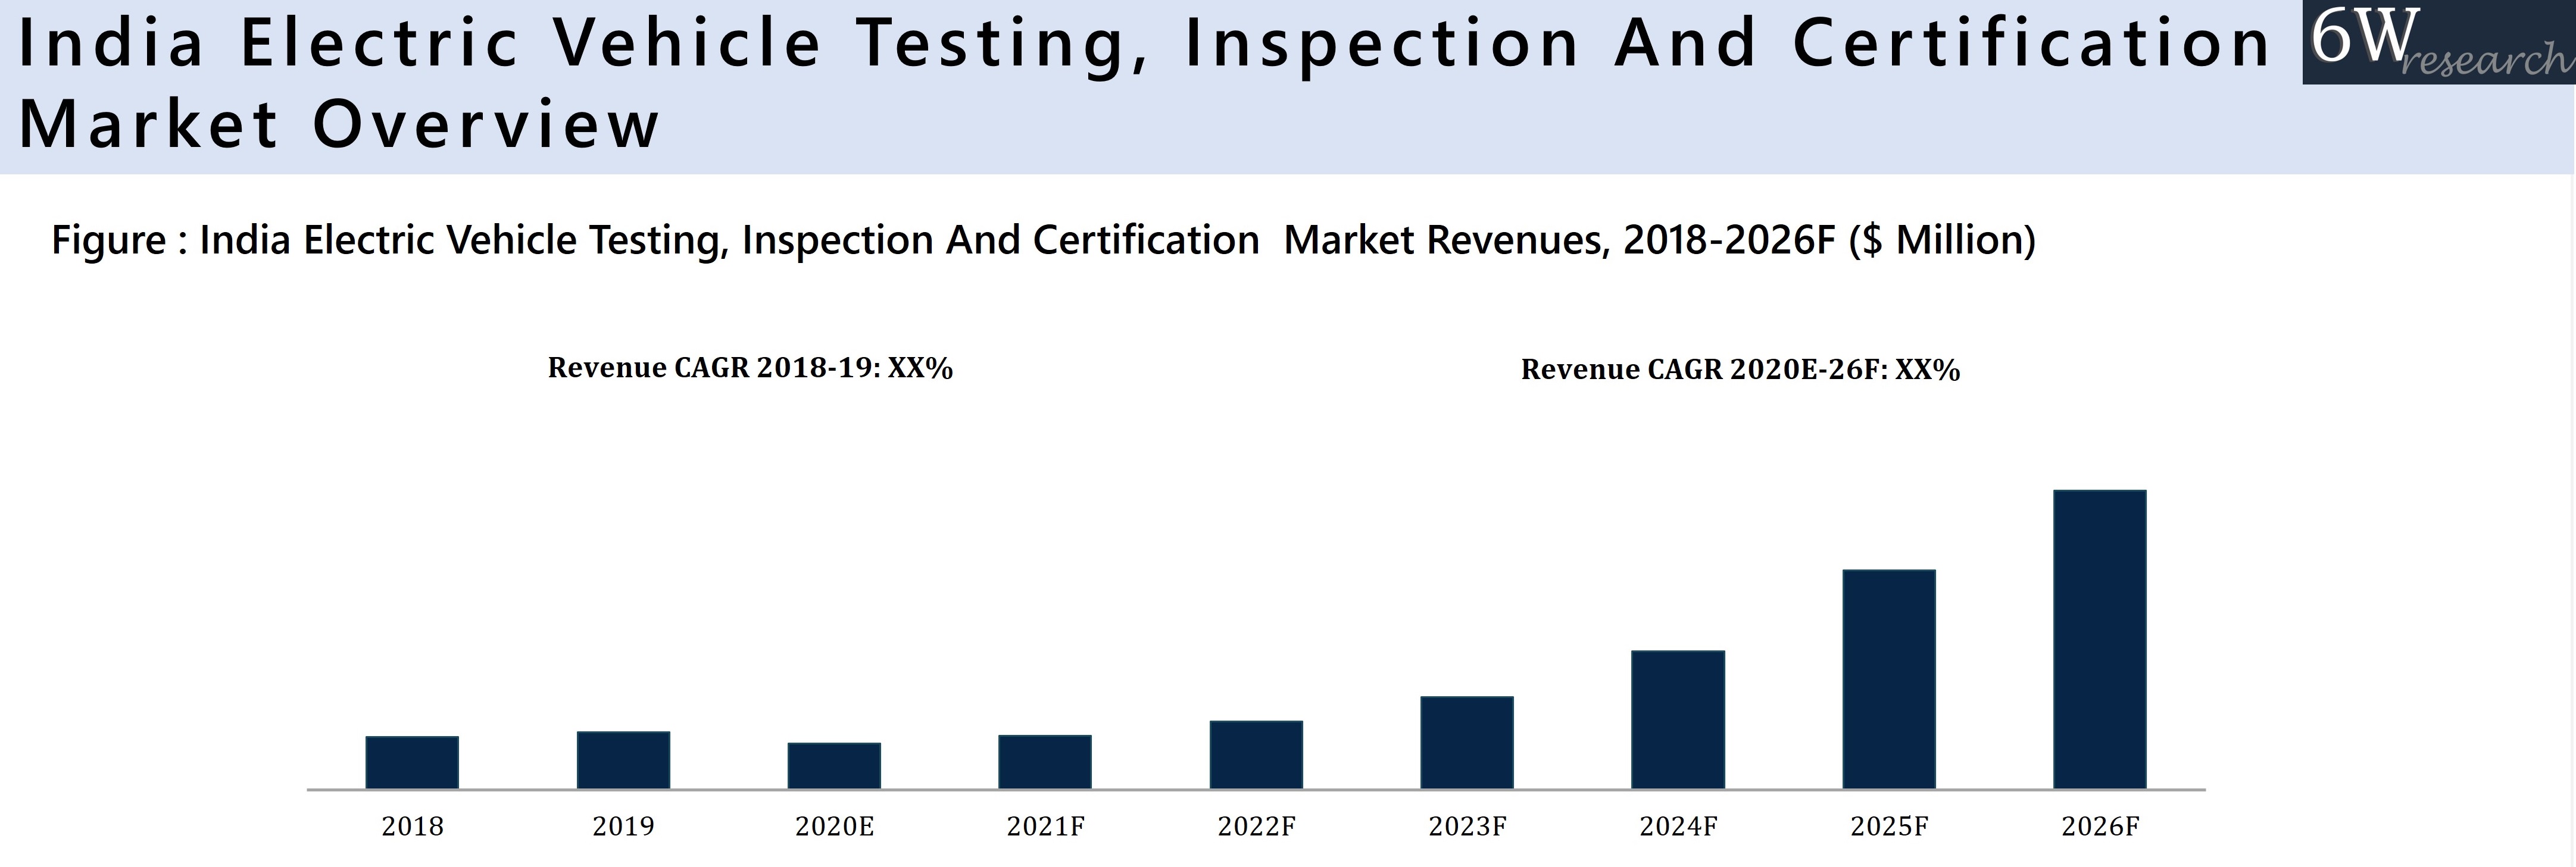 India Electric Vehicle Testing, Inspection And Certification Market Overview